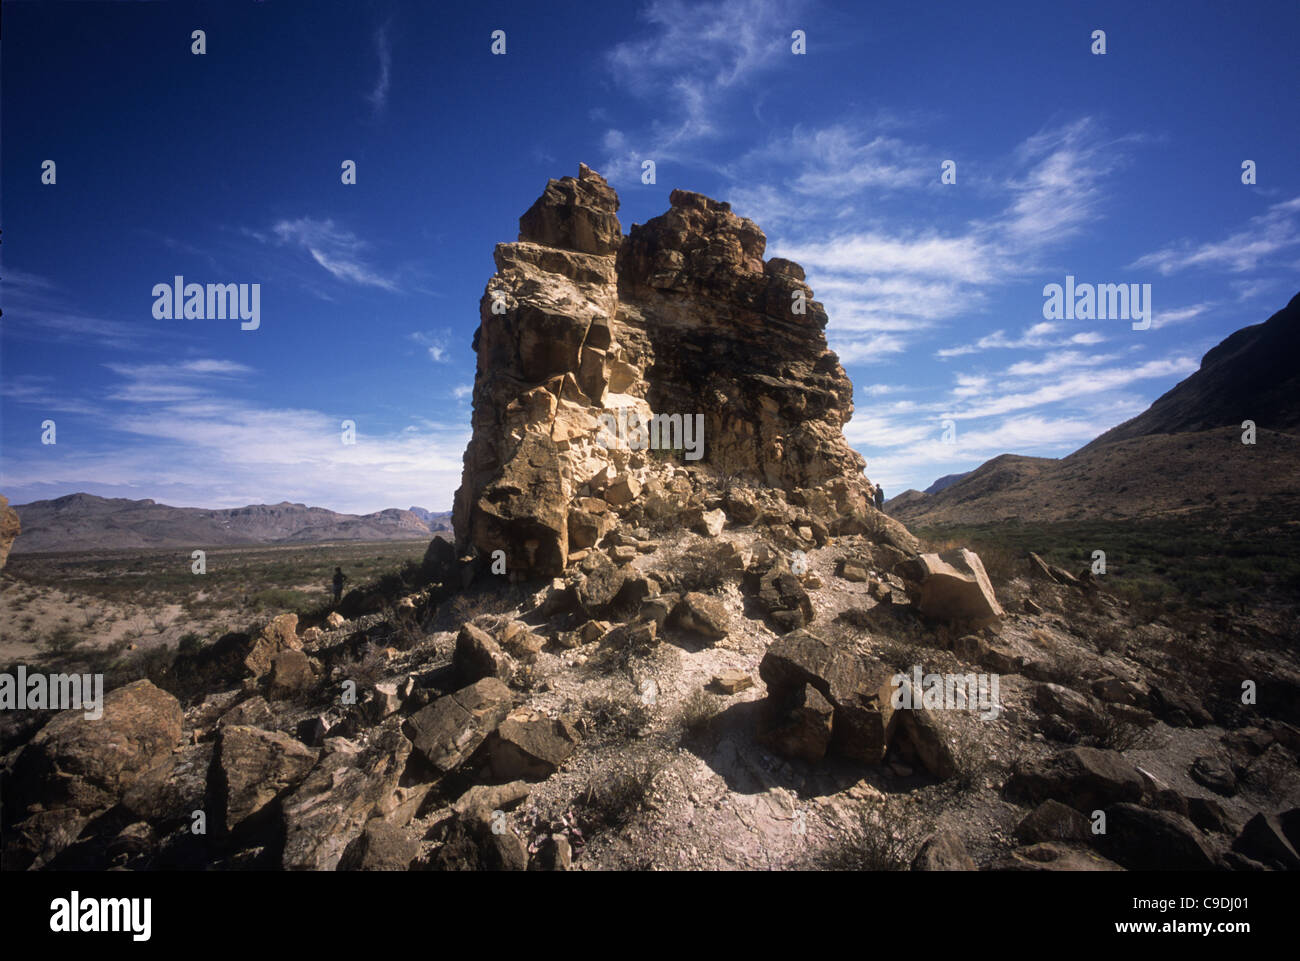 The Chimneys rock formation is a popular hiking spot on the west side of Big Bend National Park in west Texas. Stock Photo